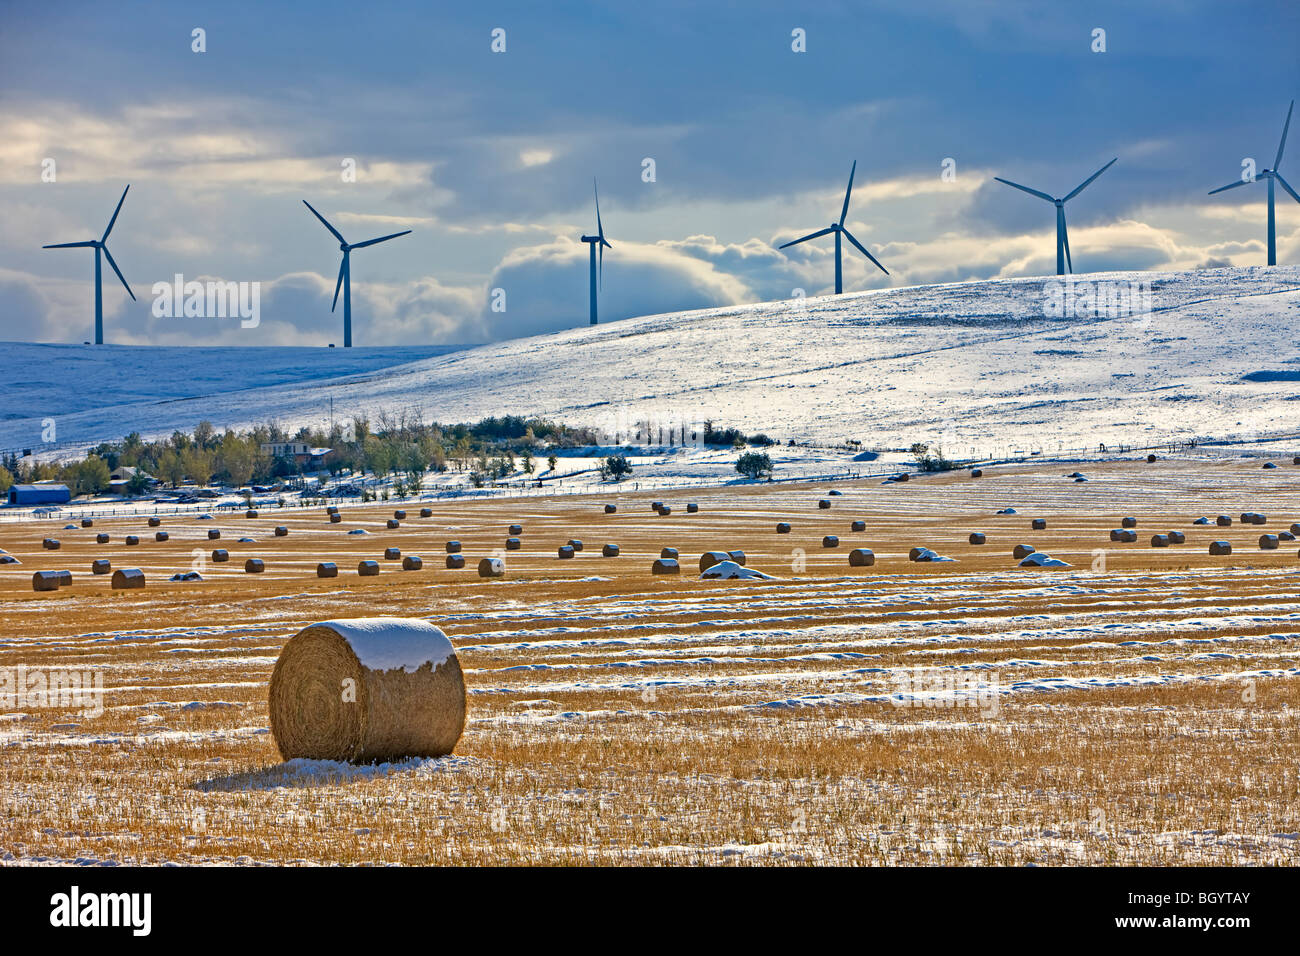 Hay bales covered in snow in Cowley backdropped by windmills in Southern Alberta, Canada. Stock Photo